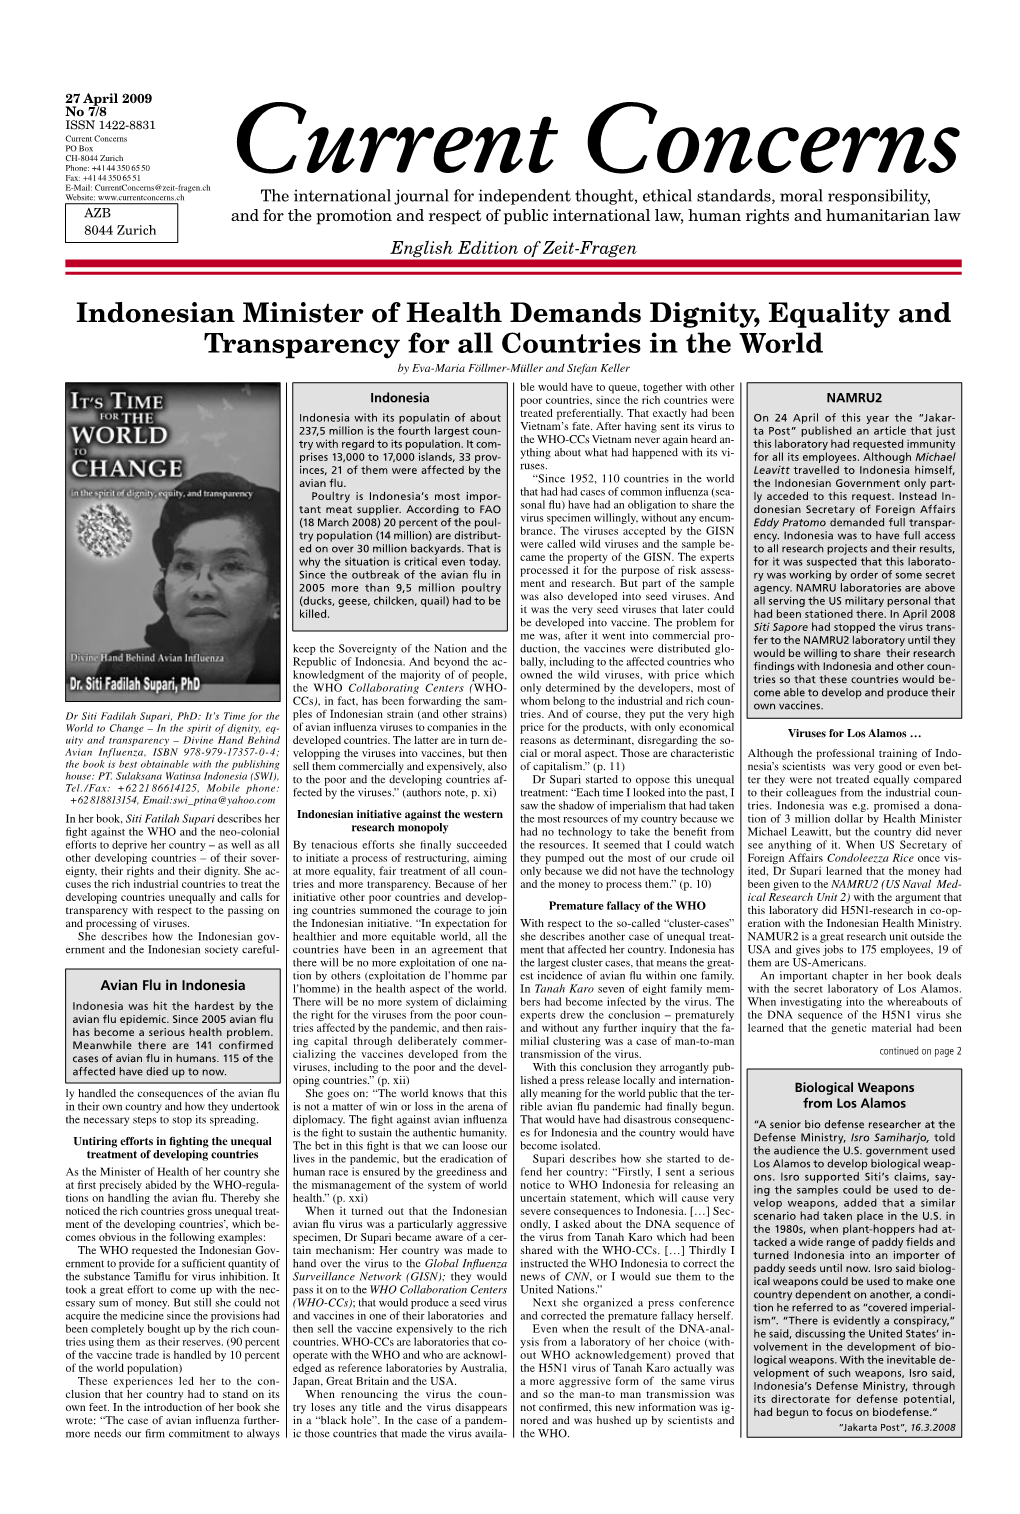 Indonesian Minister of Health Demands Dignity, Equality And